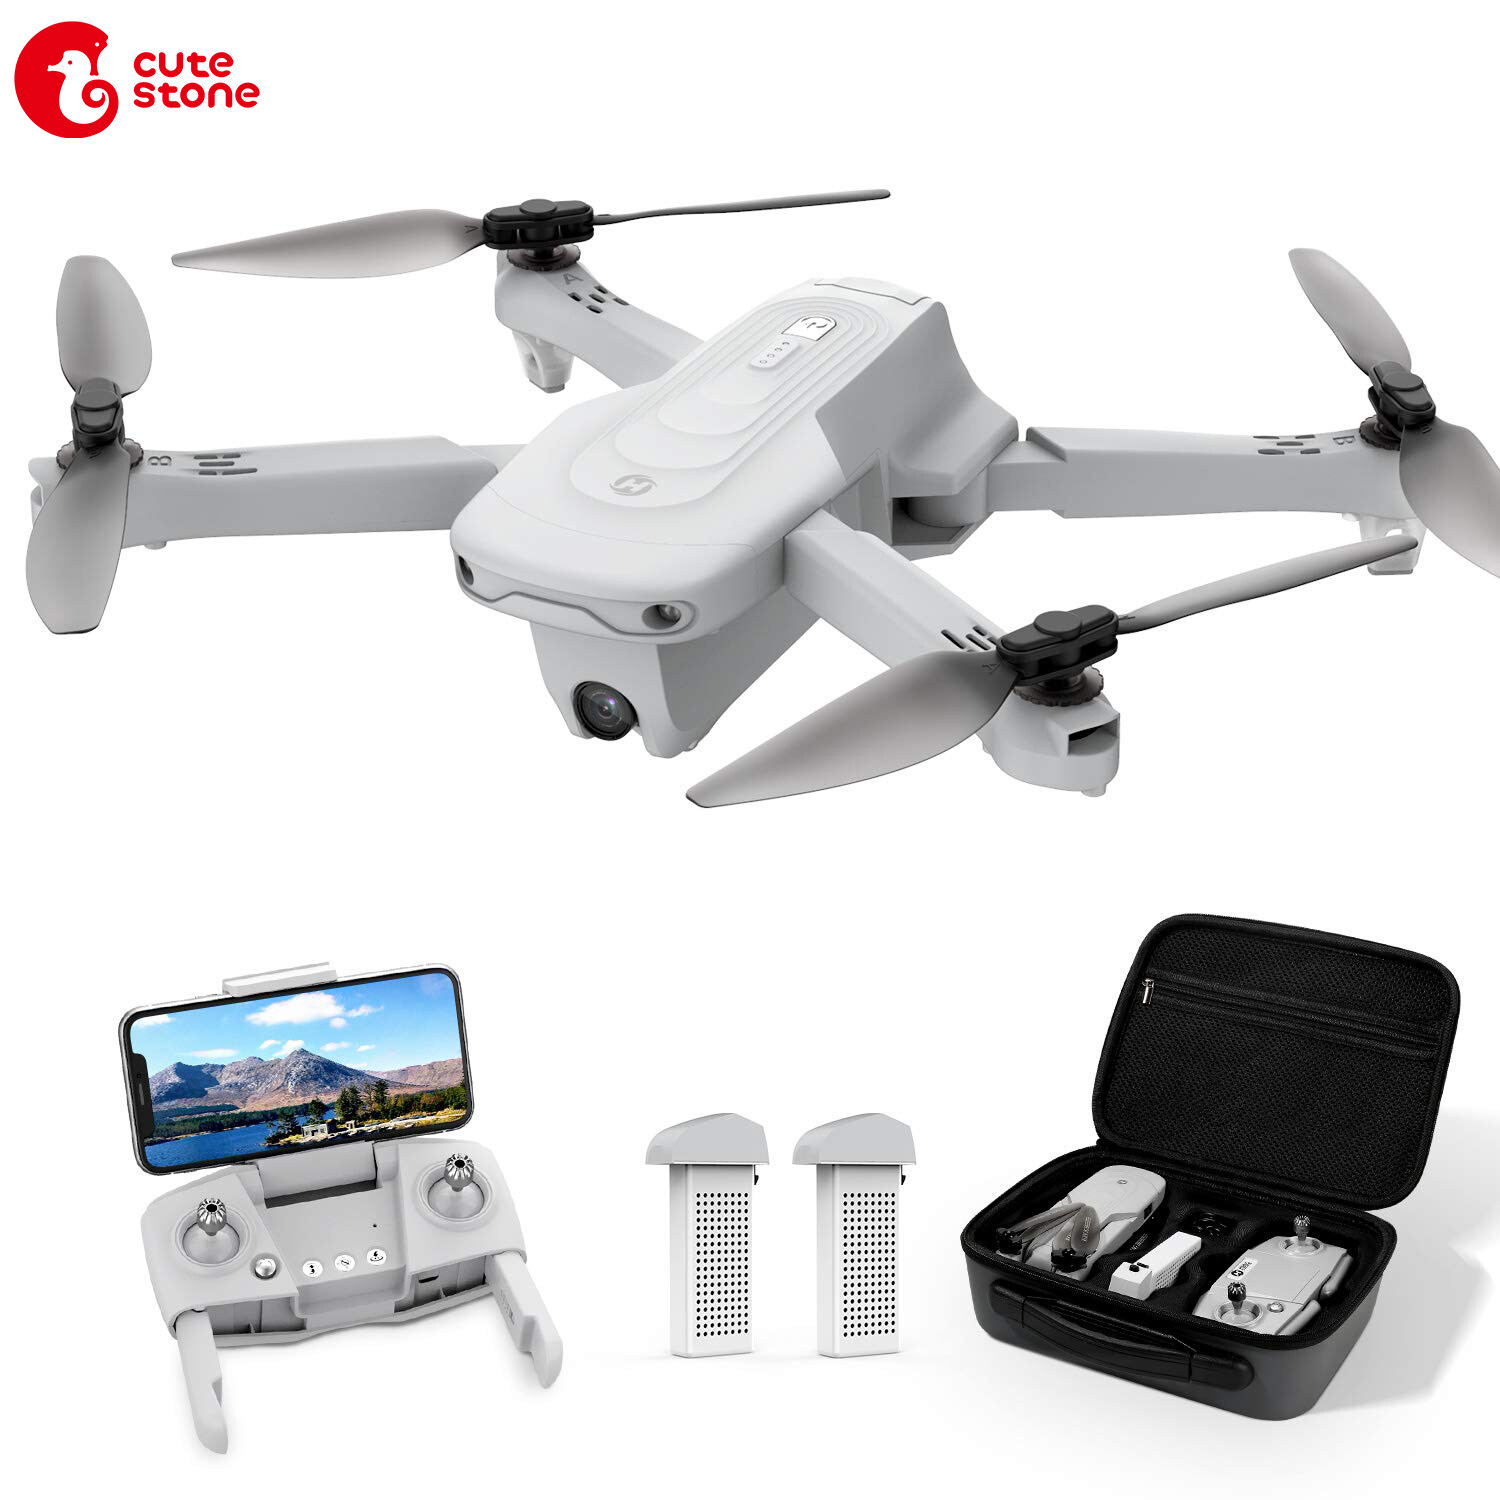 Carrying Case Auto Hover Gravity Sensor Holy Stone HS440 Foldable FPV Drone with 1080P WiFi Camera for Adults and Kids; Voice and Gesture Control RC Quadcopter with 2 Batteries for 40 Min flight 